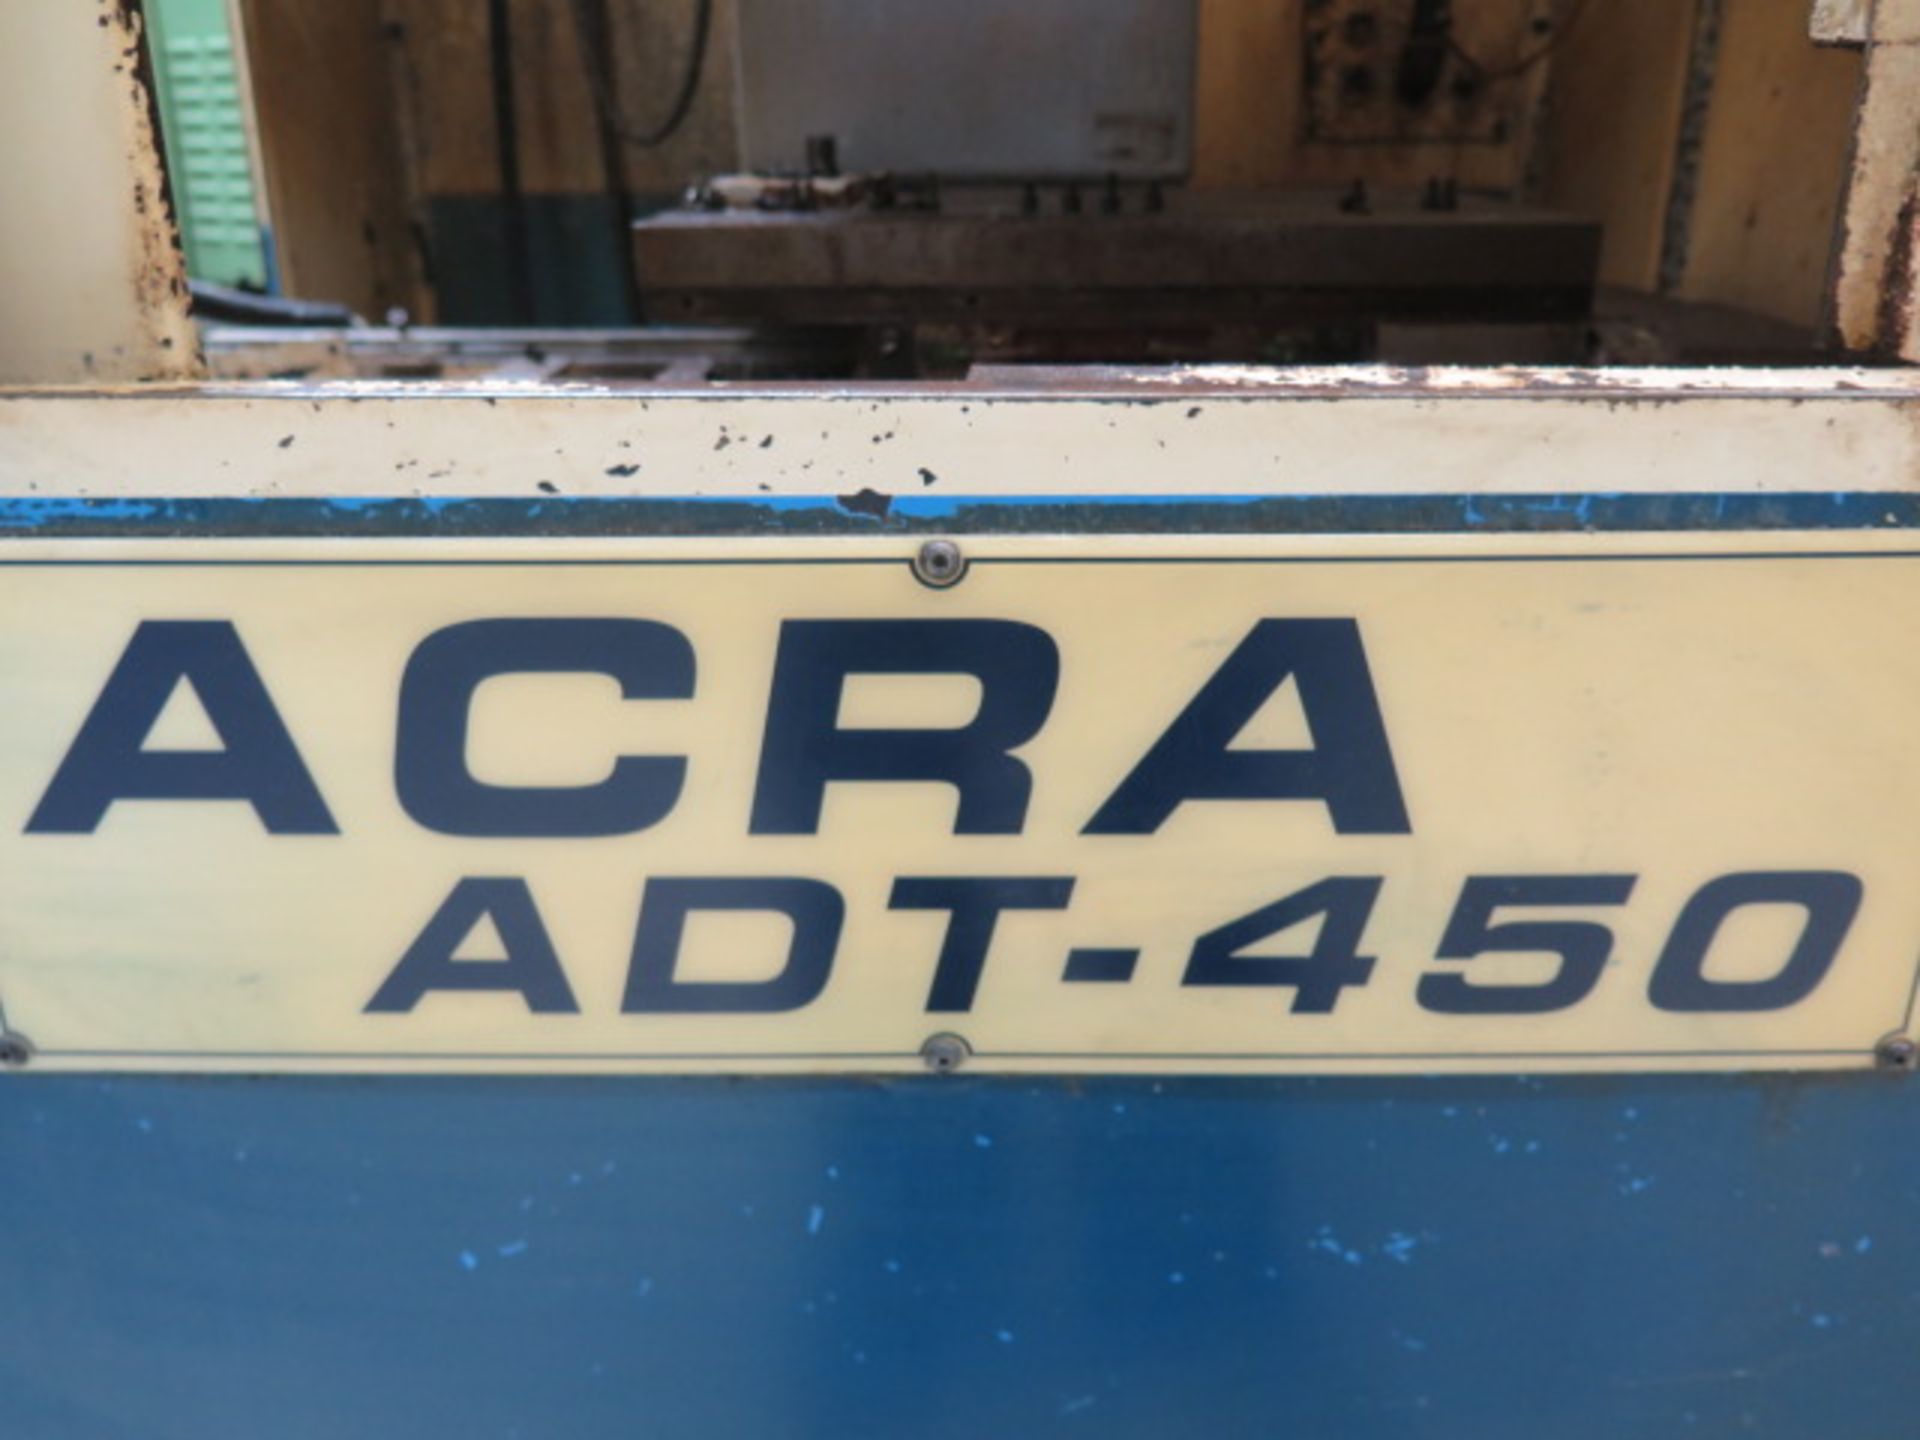 2003 Acra ADT-450 CNC Drilling /Tapping Center s/n MA5V0012285 (NEEDS REPAIR) w/ Mits 50M, OLD AS IS - Image 12 of 14